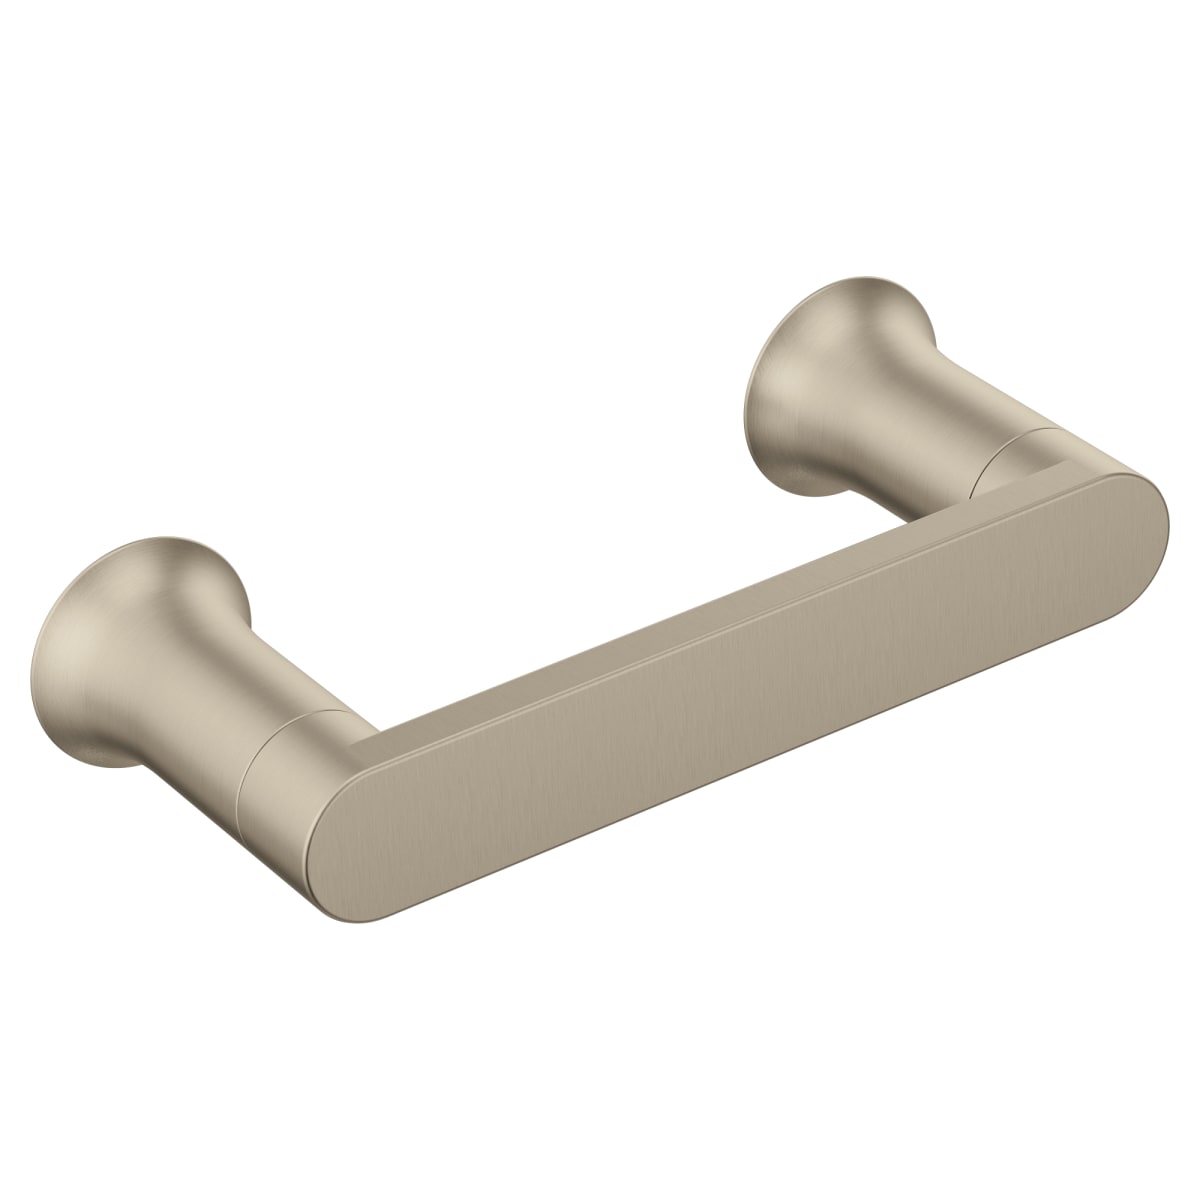 BWE Double Post Pivoting Wall Mounted Towel Bar Toilet Paper Holder in Brushed Gold